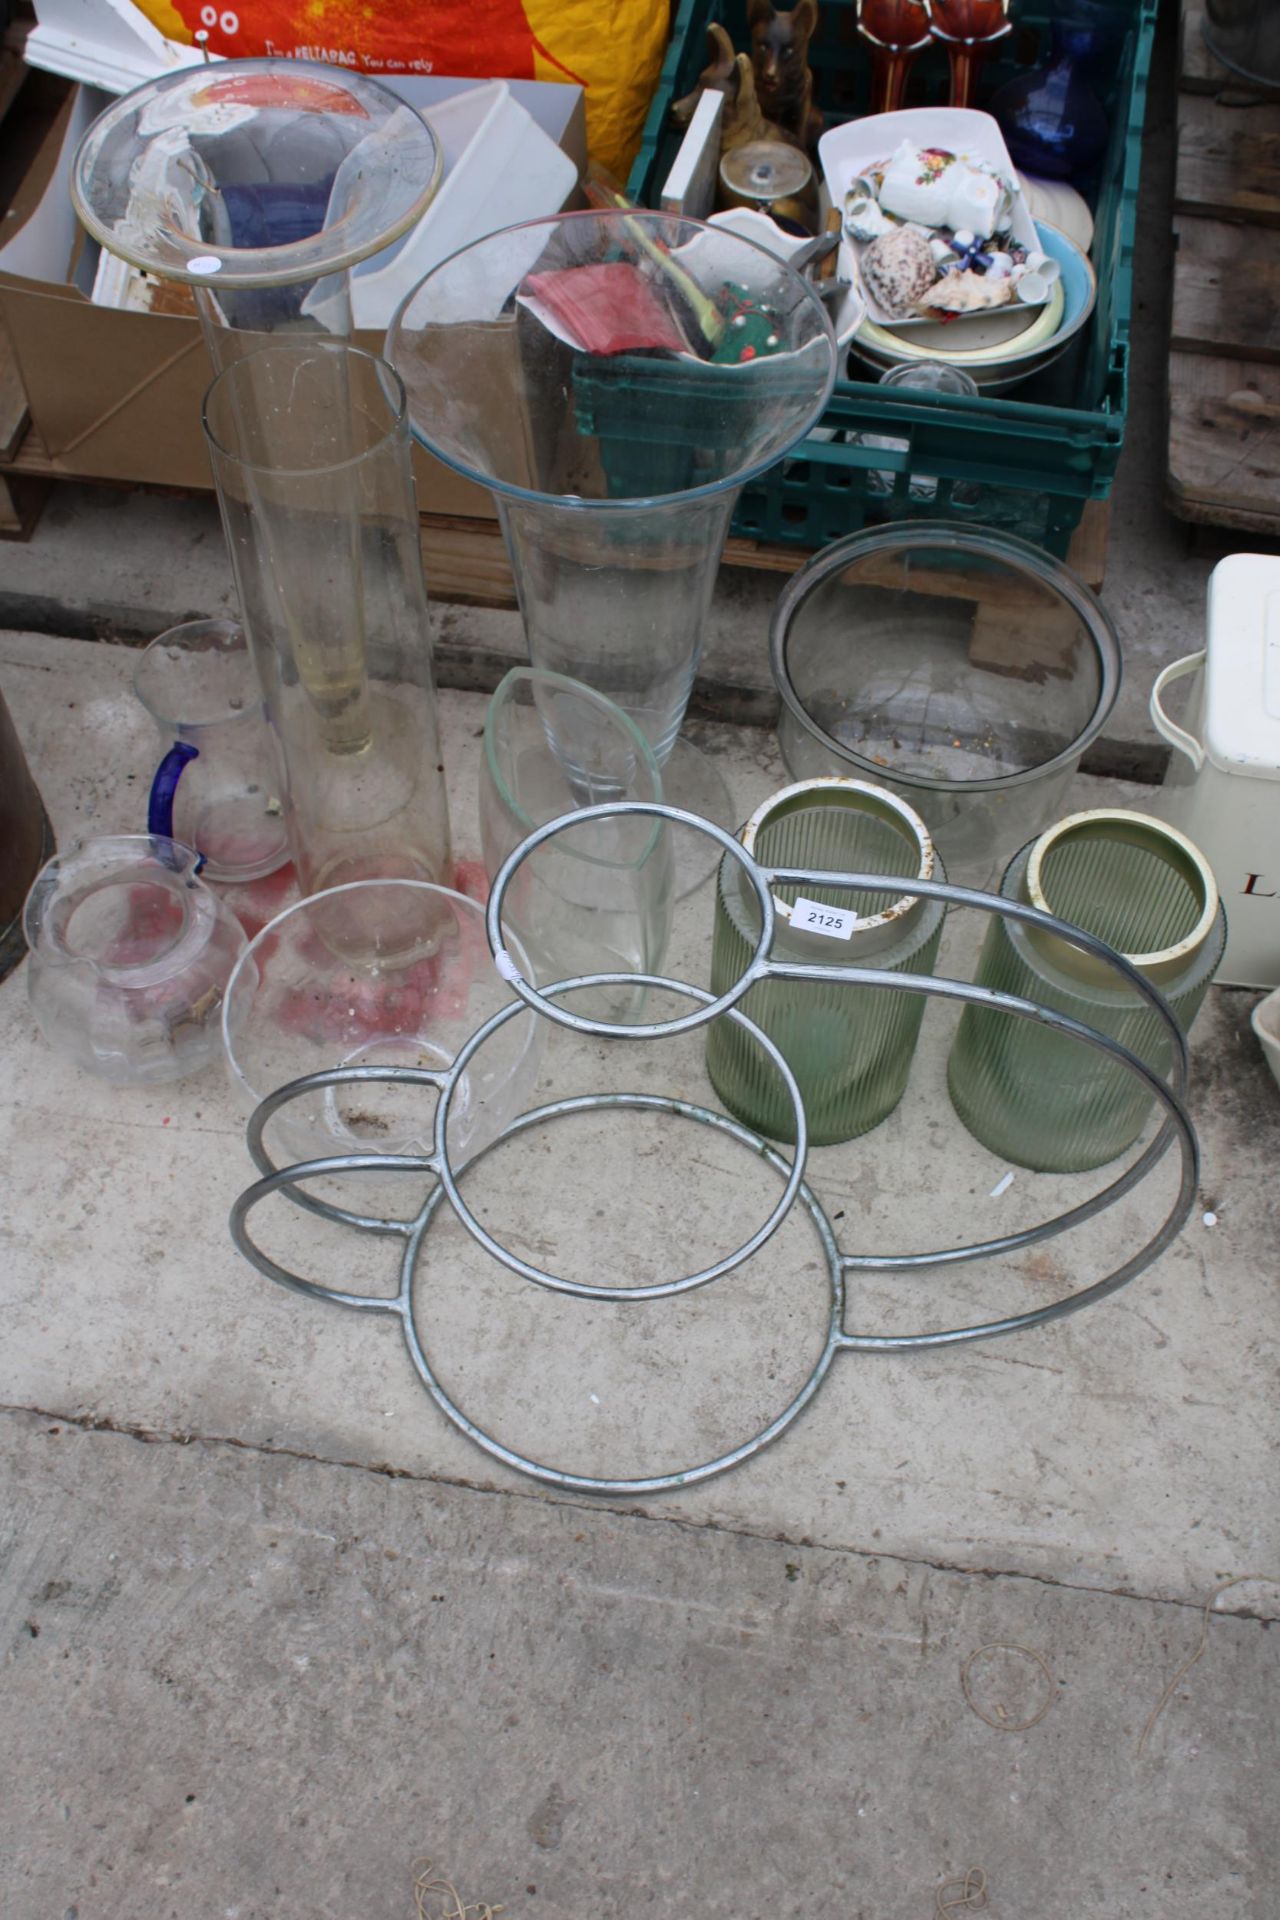 AN ASSORTMENT OF GLASS VASES AND A METAL STAND